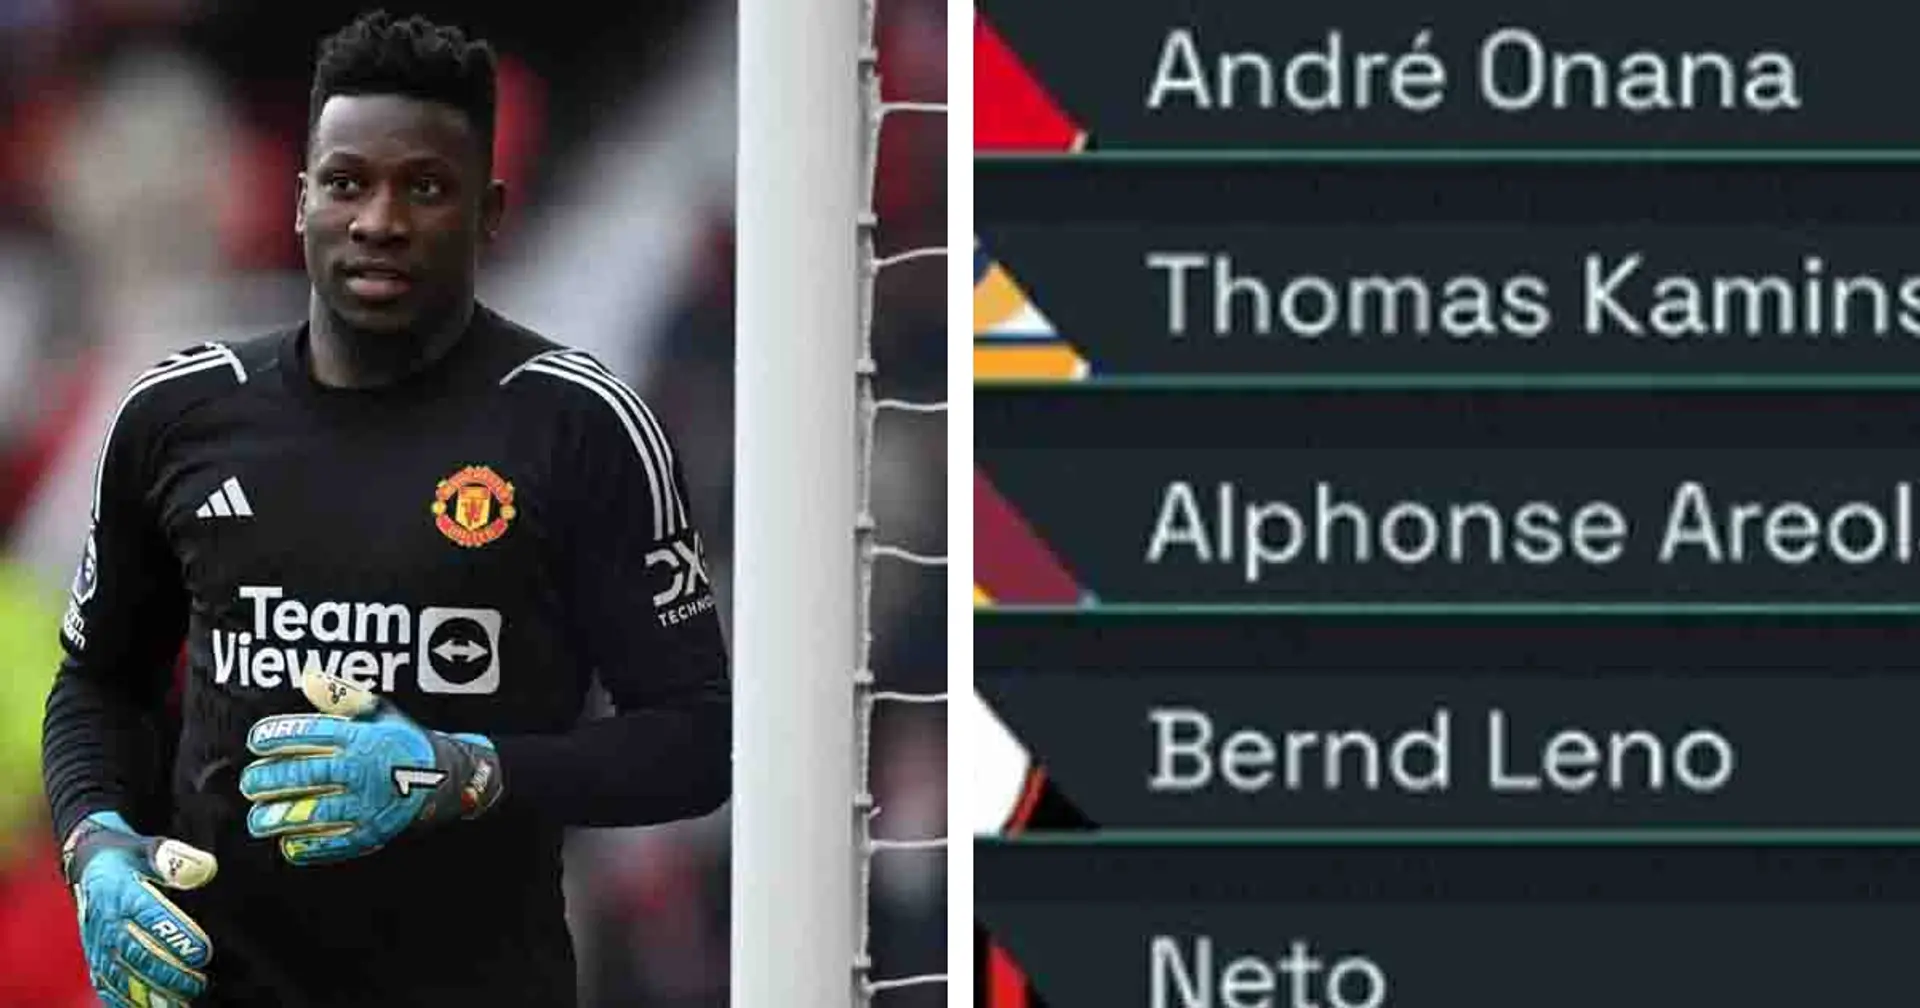 Andre Onana tops key Premier League goalkeepers stat after Liverpool draw